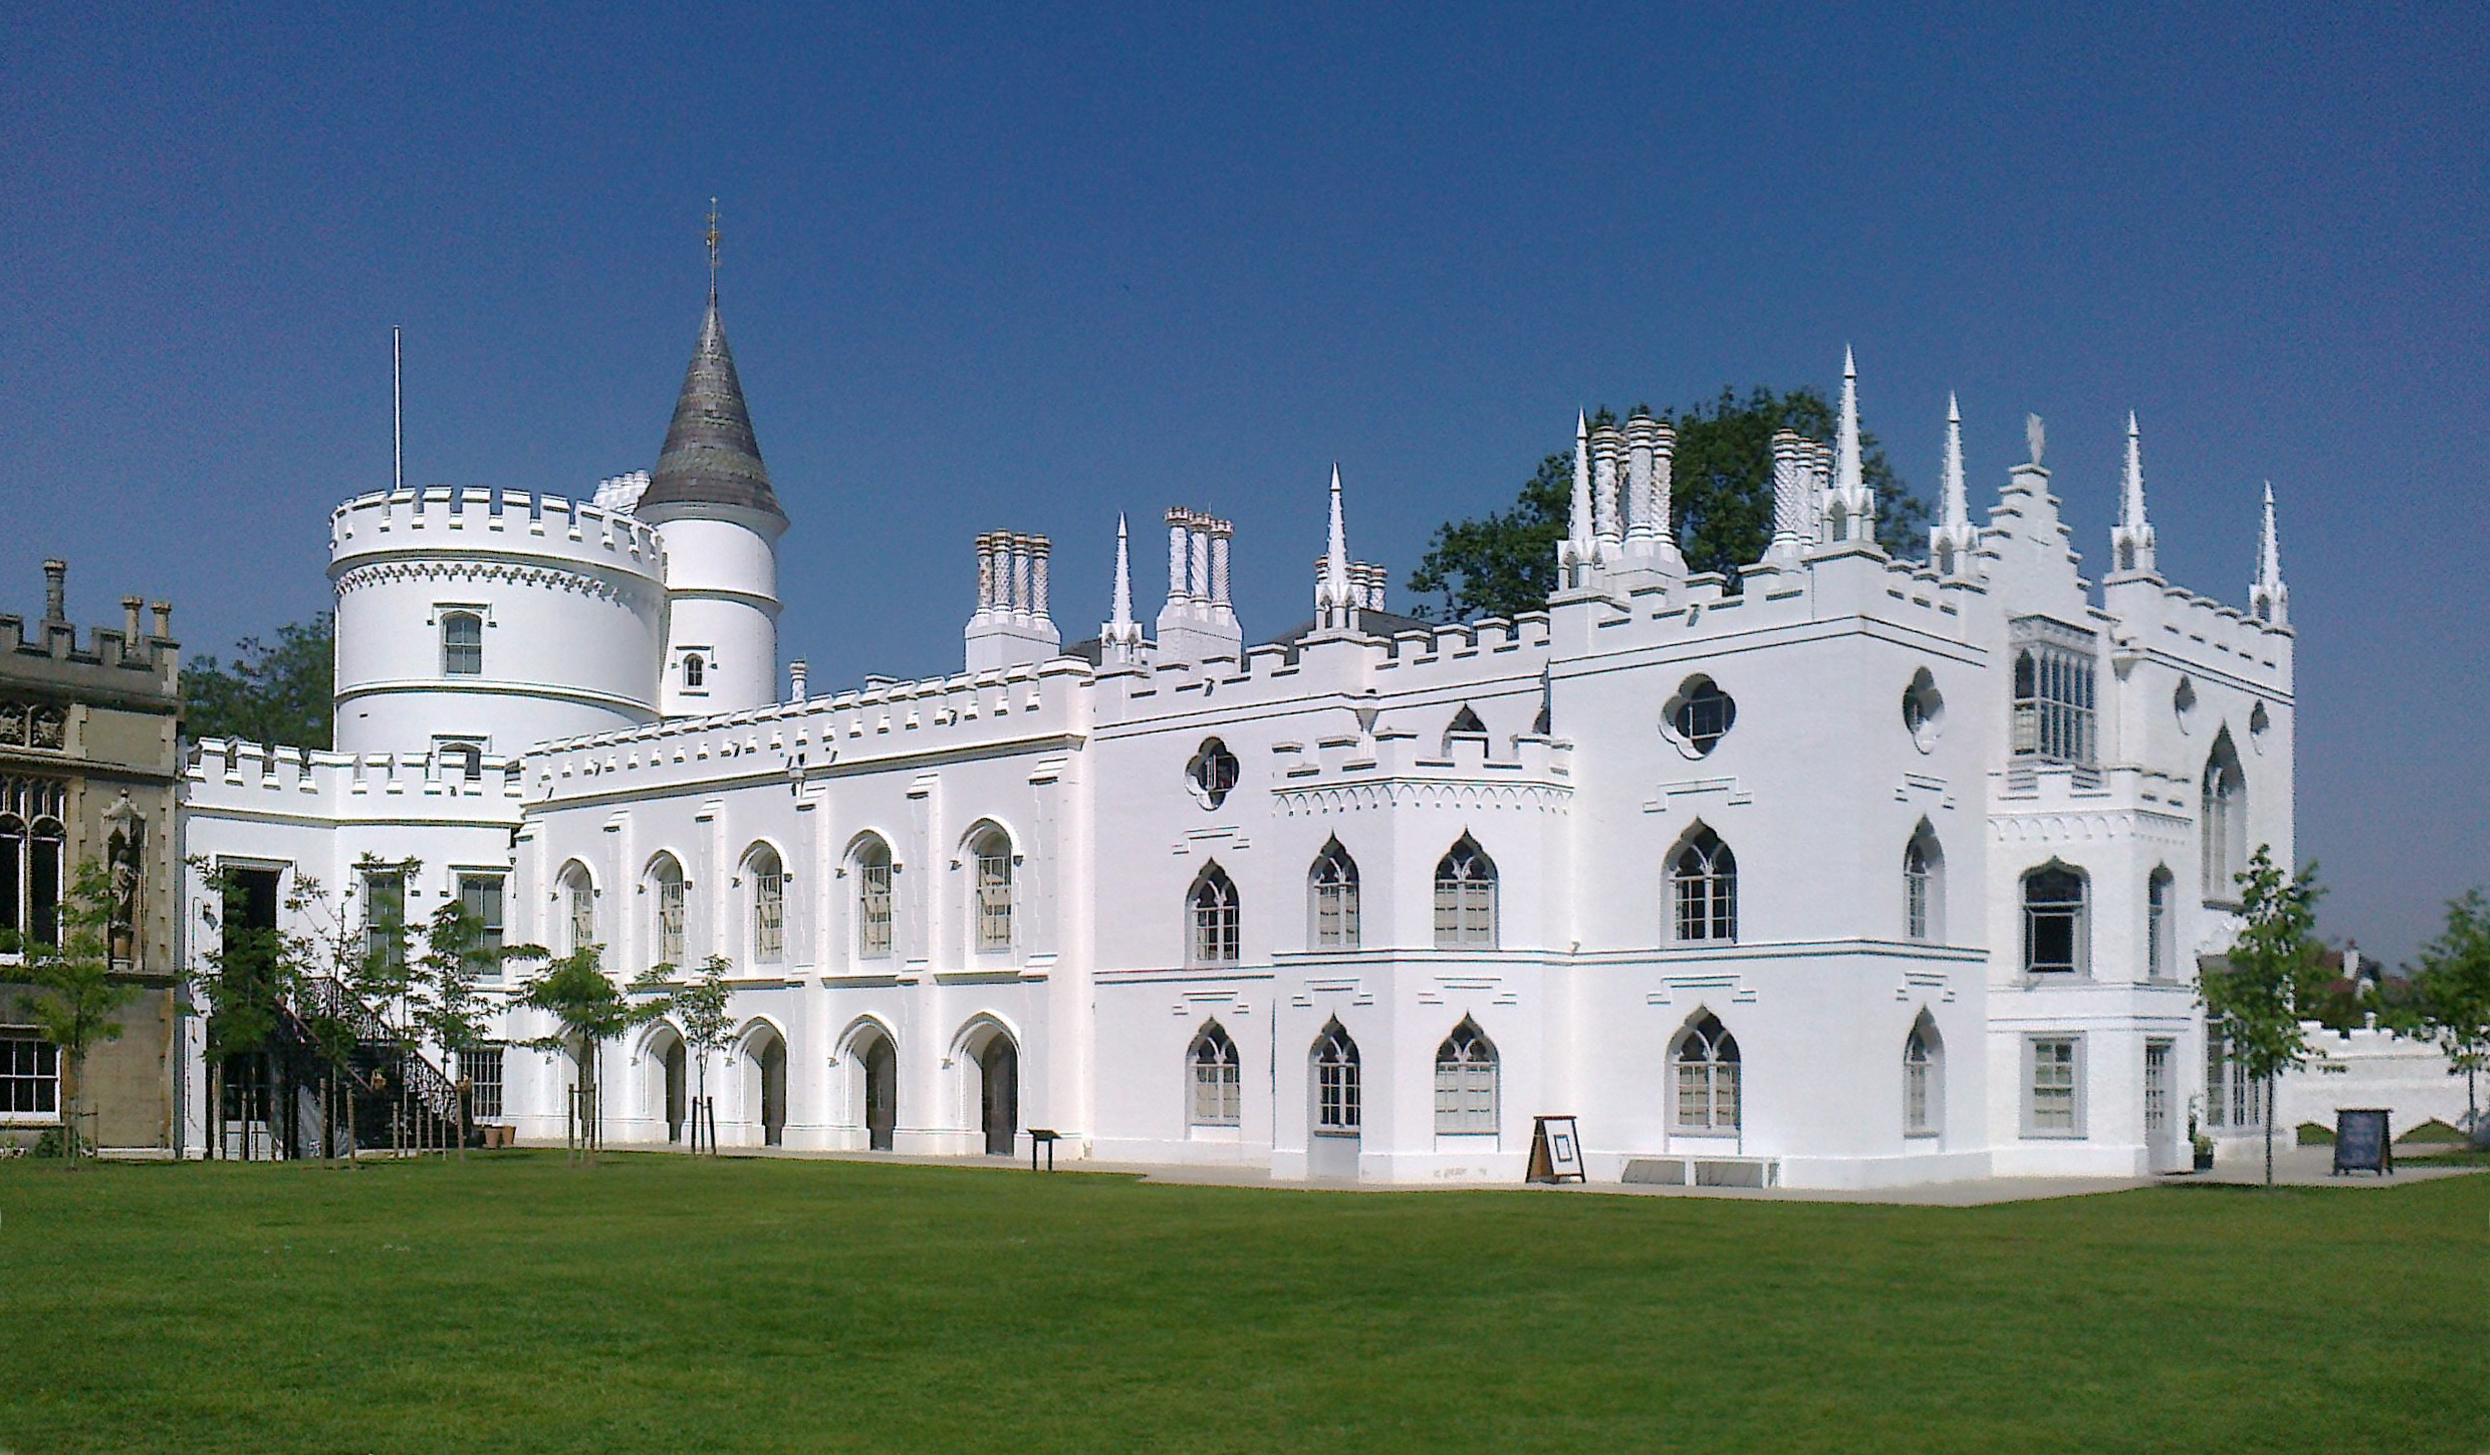 Strawberry Hill, photographed in 2012, after a recent restoration. (Wikimedia Commons)